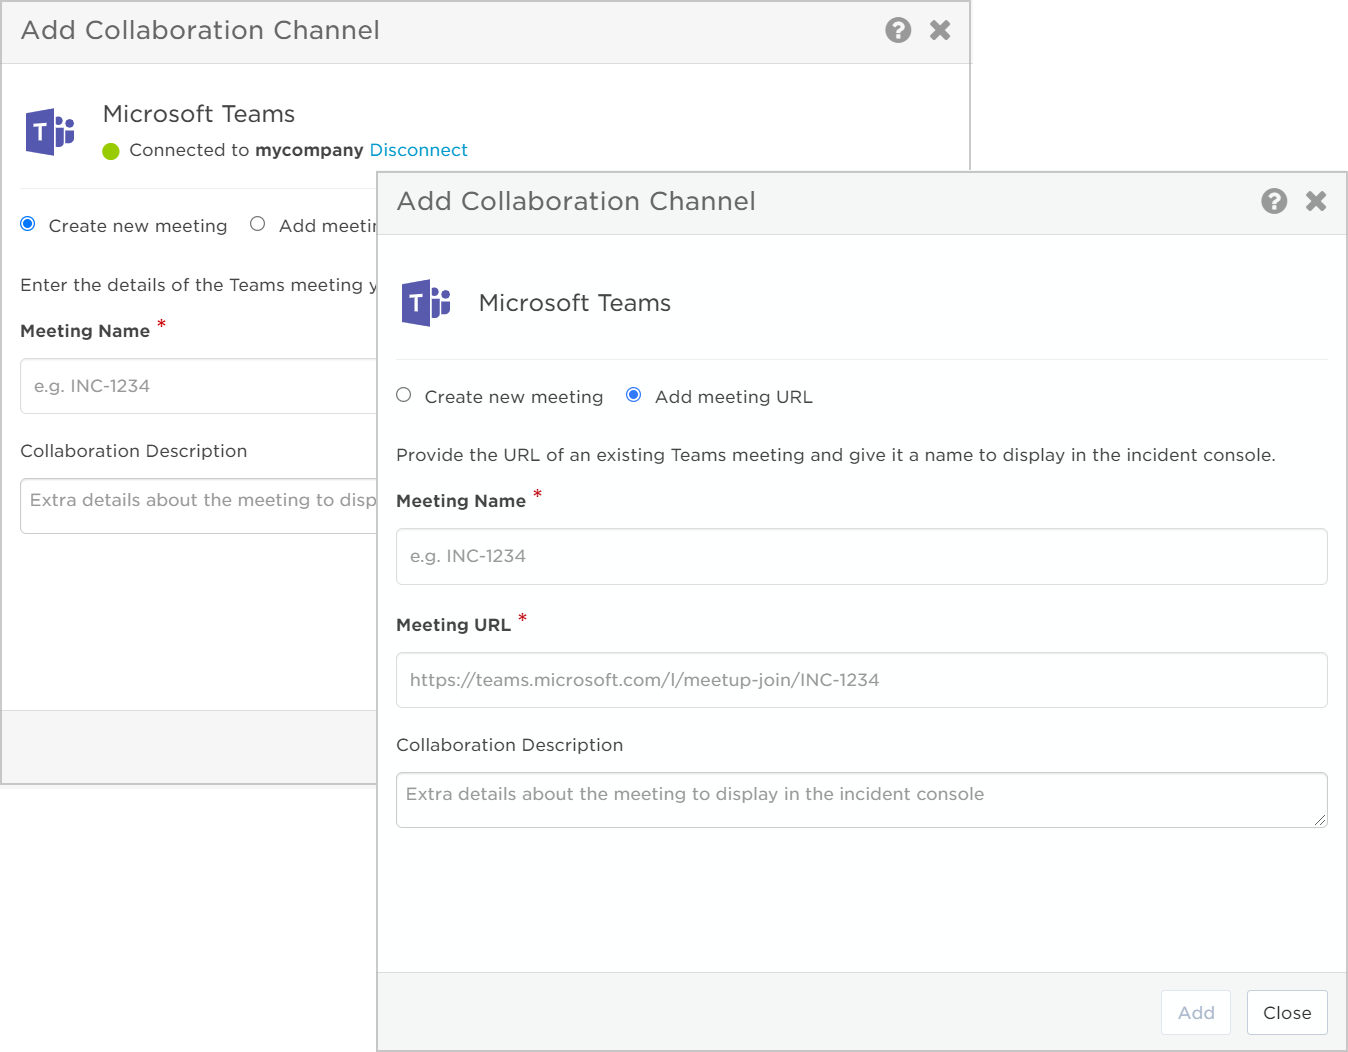 microsoft-teams-meeting-collaboration-channel.png